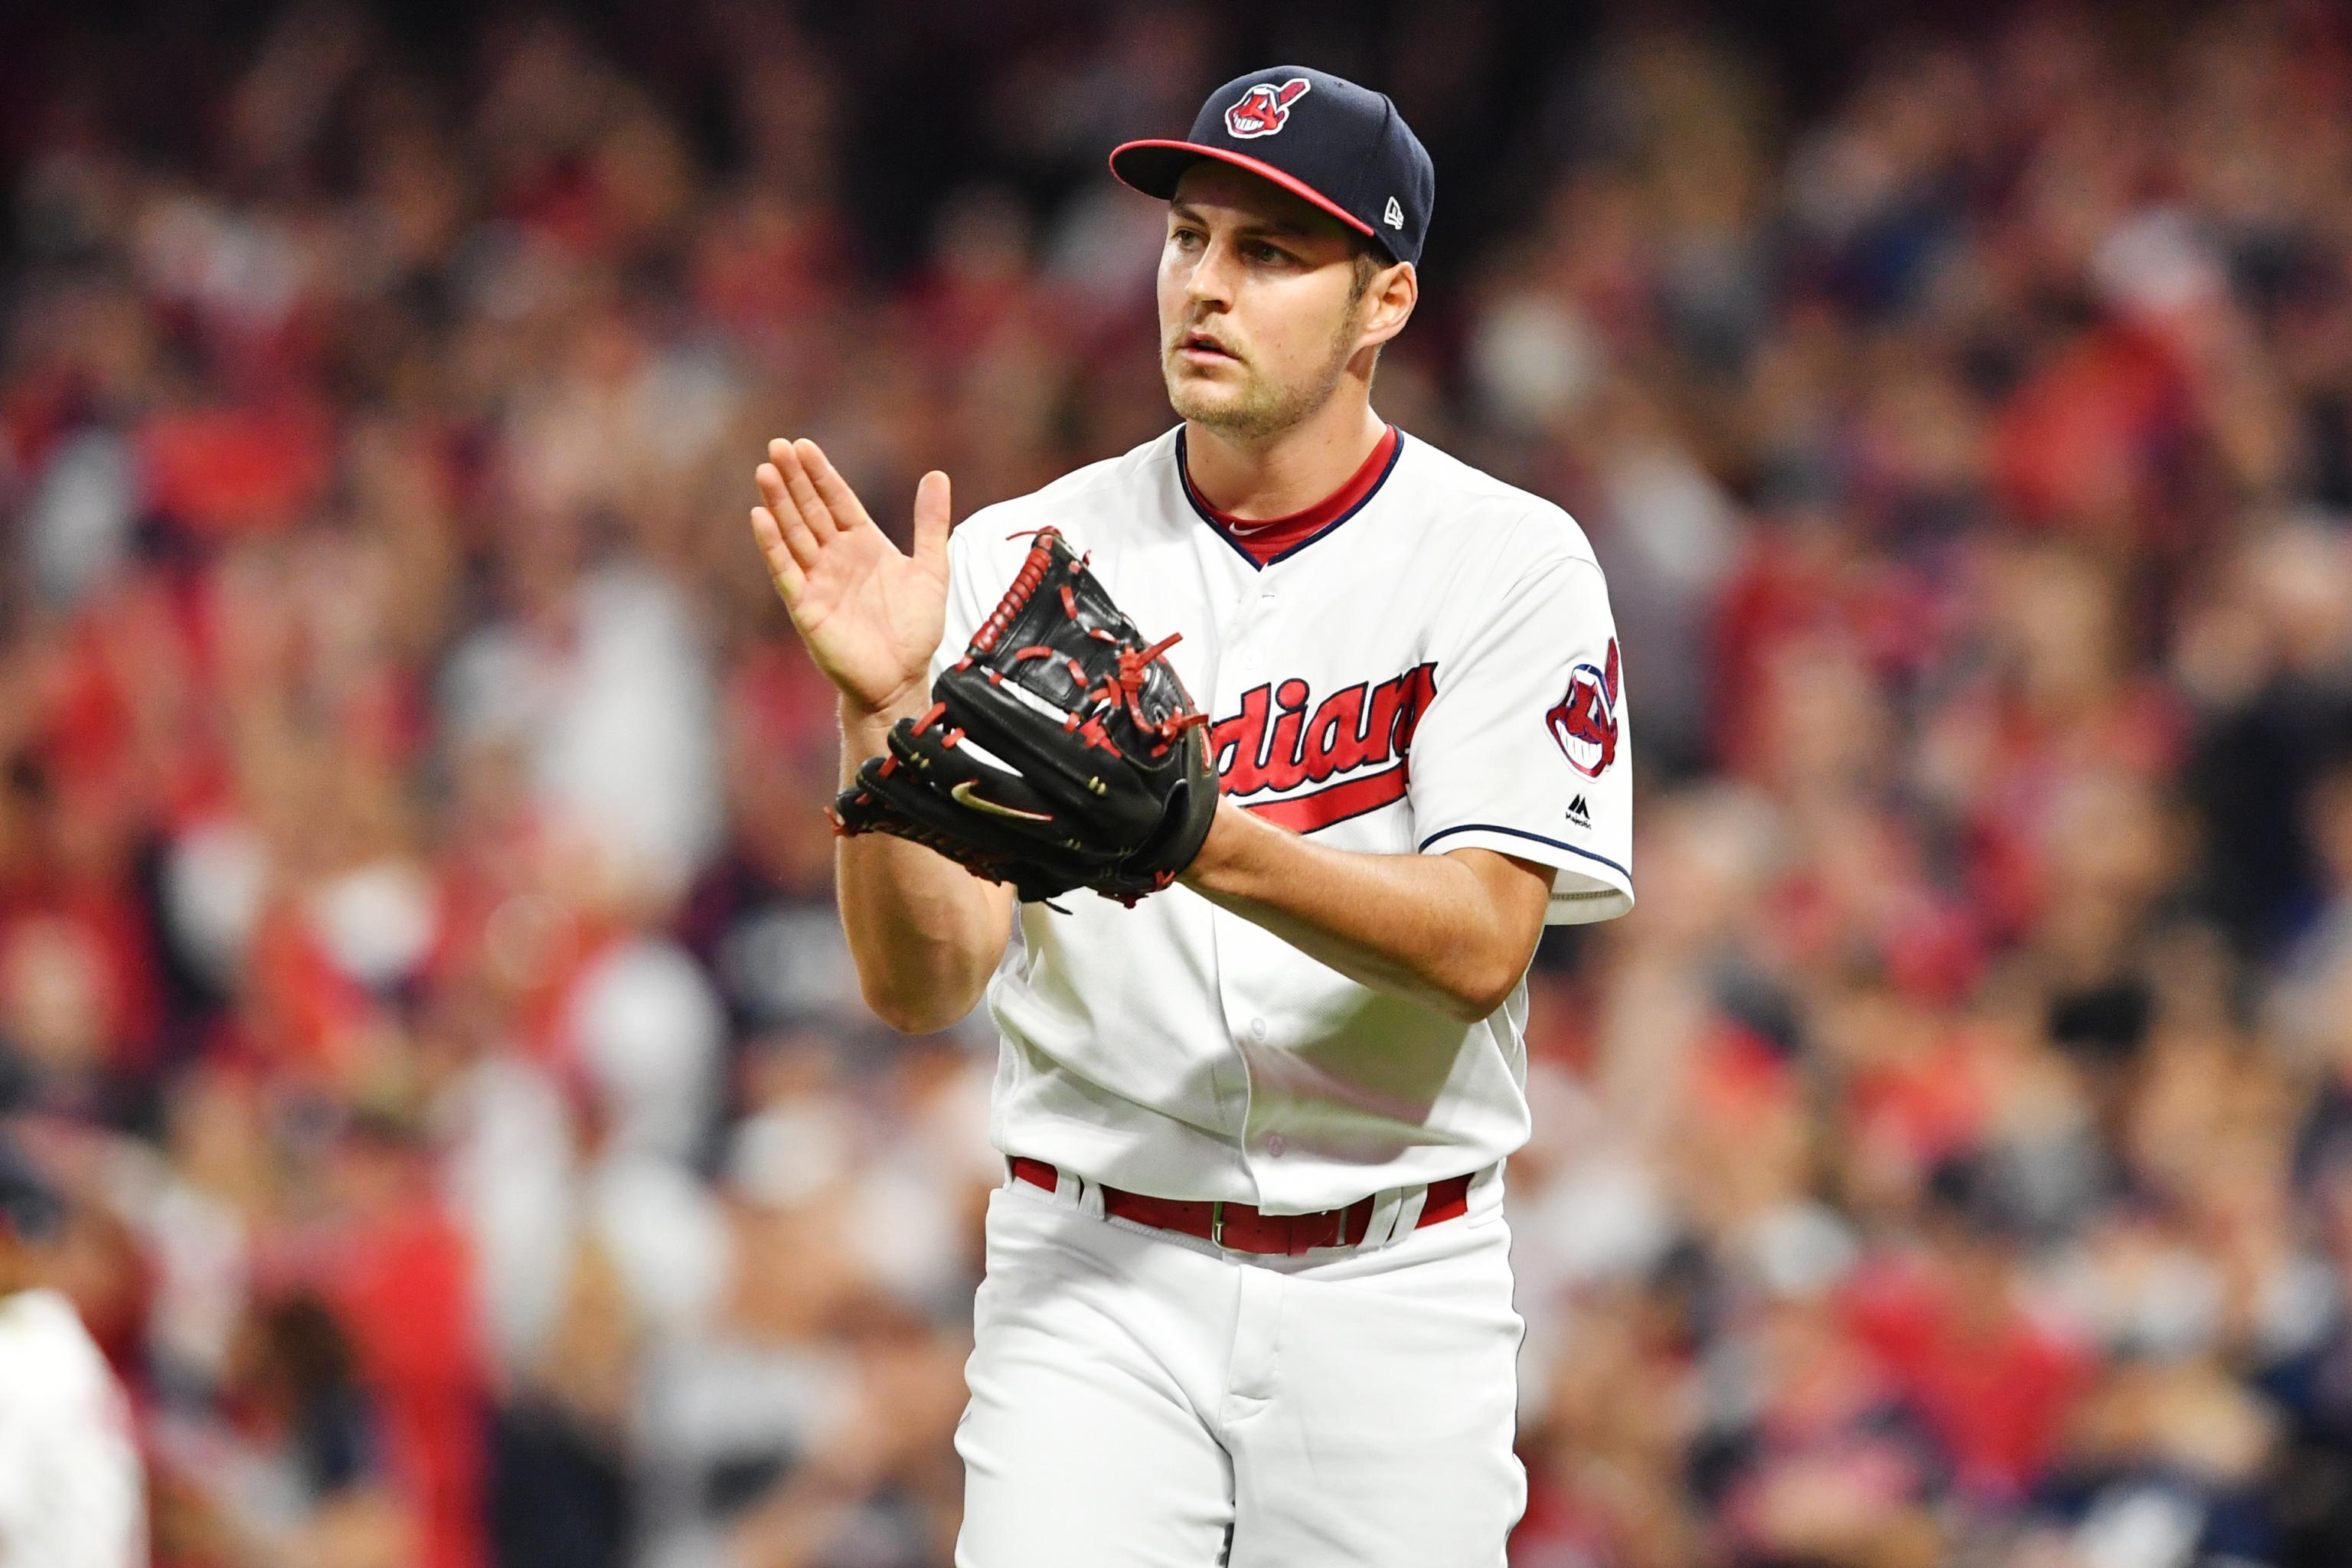 Baseball: Clippers' Trevor Bauer pitches in to improve